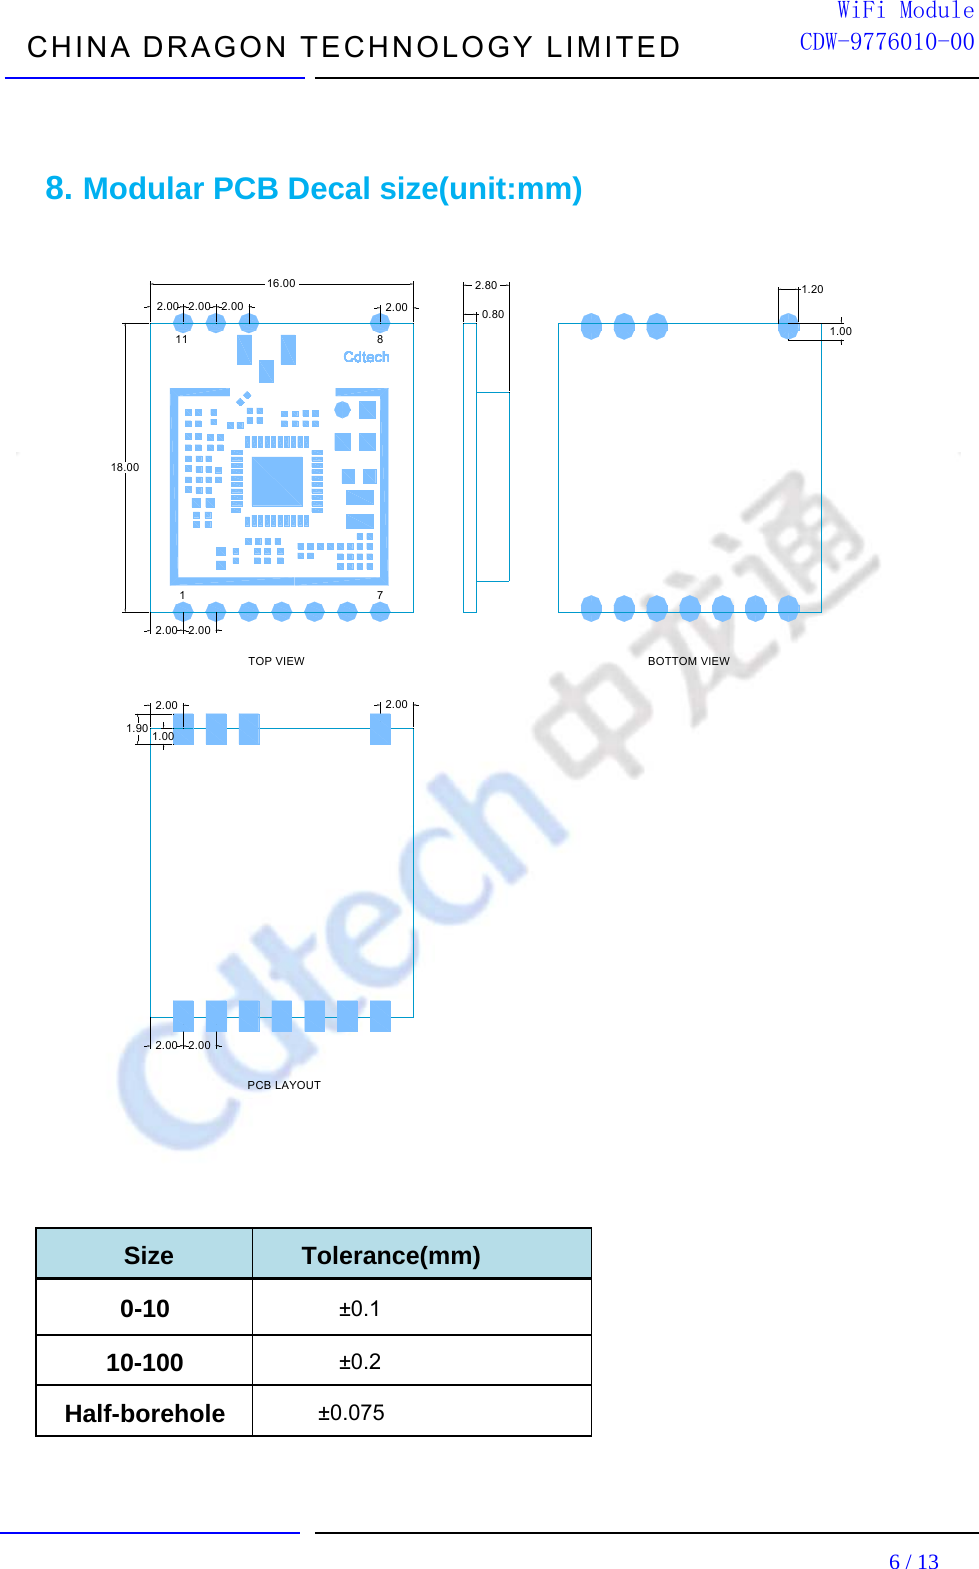  CHINA DRAGON TECHNOLOGY LIMITED                                                                         6 / 13  WiFi ModuleCDW-9776010-00                                       8. Modular PCB Decal size(unit:mm)  16.0018.002.00 2.00 2.00 2.002.00 2.000.802.80178111.201.002.00 2.002.00 2.00TOP VIEW BOTTOM VIEWPCB LAYOUT1.90 1.00    Size Tolerance(mm) 0-10 ±0.1 10-100 ±0.2 Half-borehole  ±0.075   